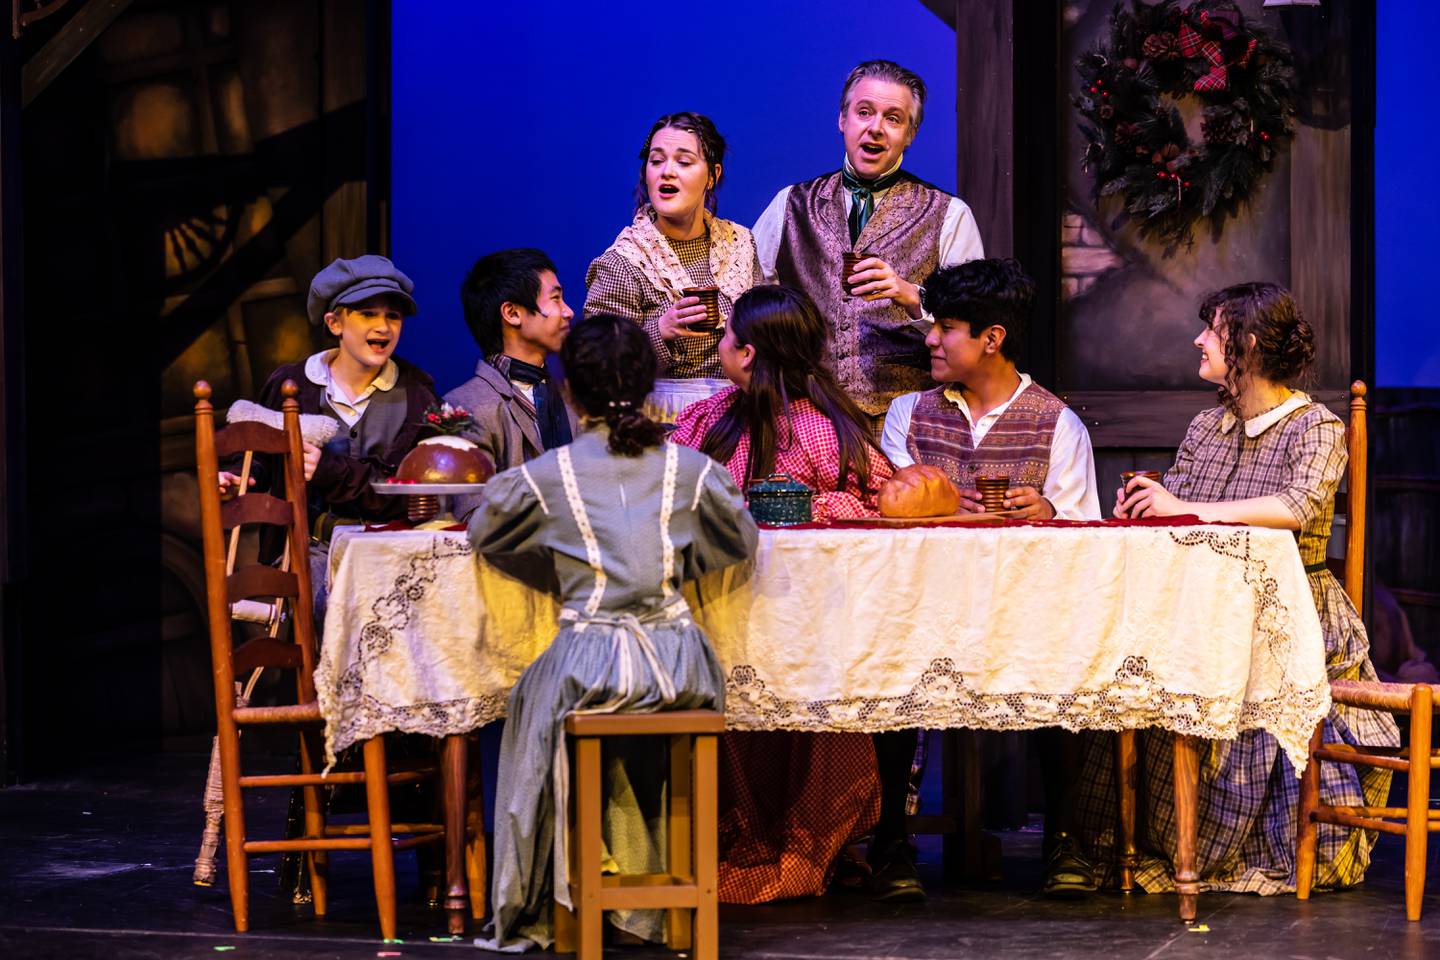 The Cratchit family in the Metropolis production of "A Christmas Carol."